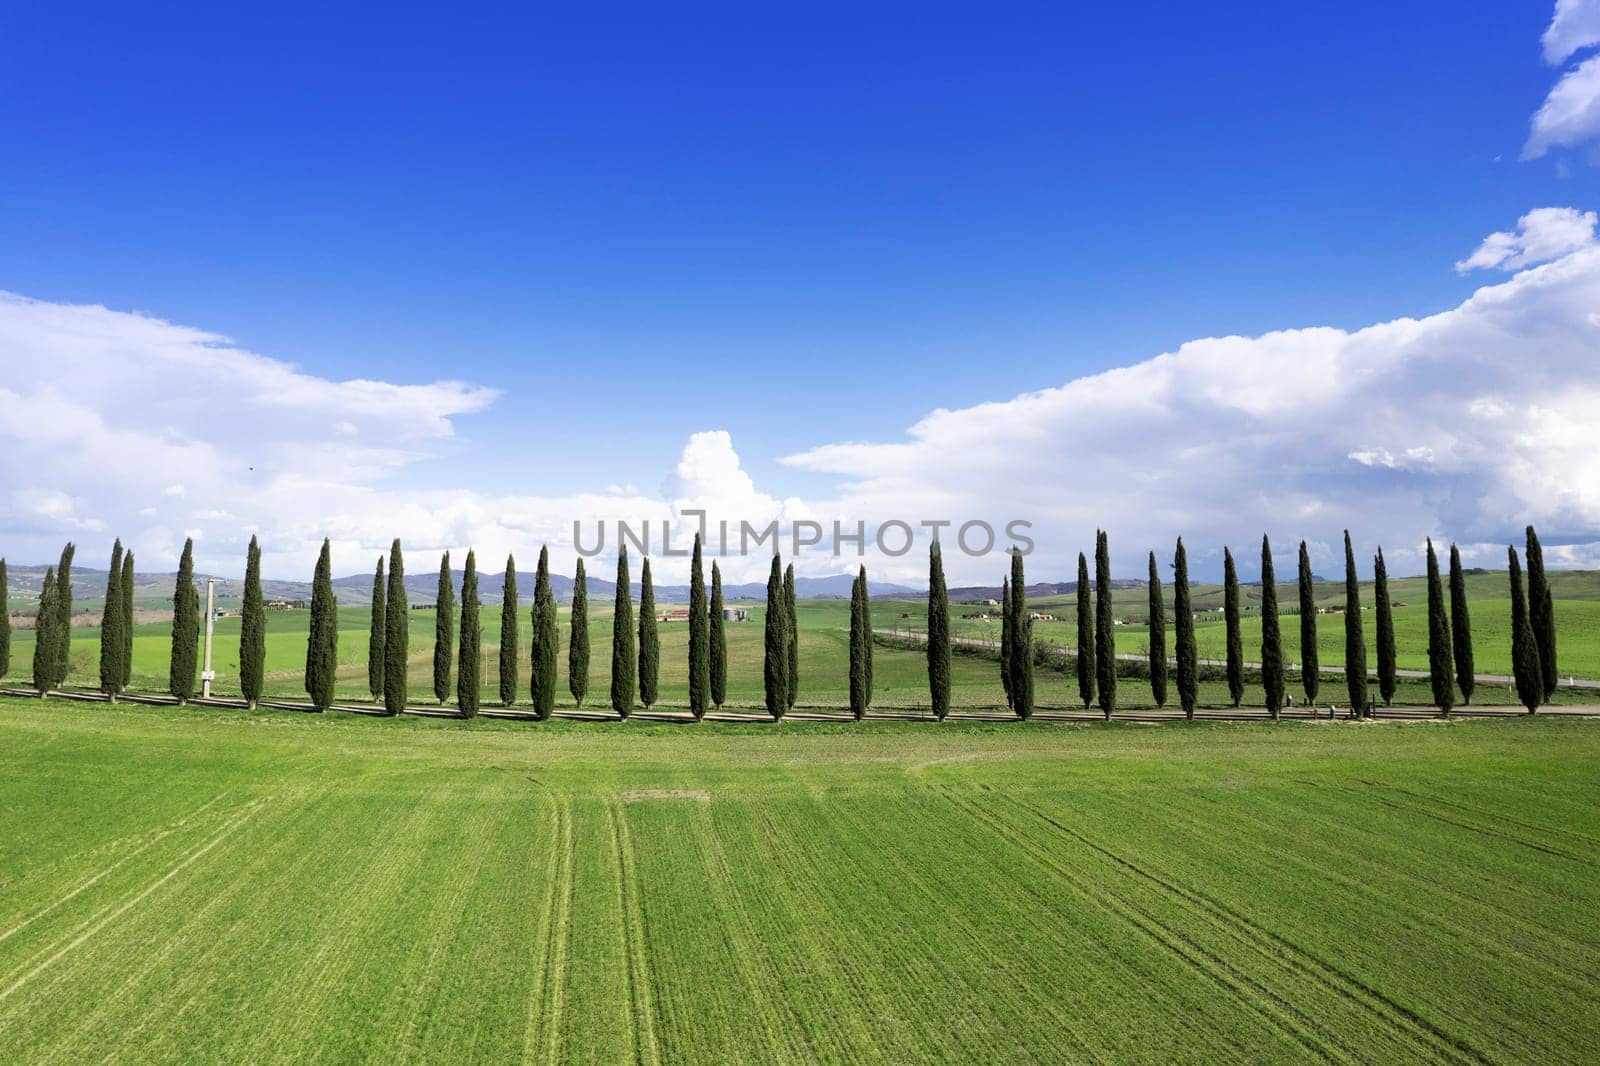 Photographic documentation of a row of cypresses in the province of Siena